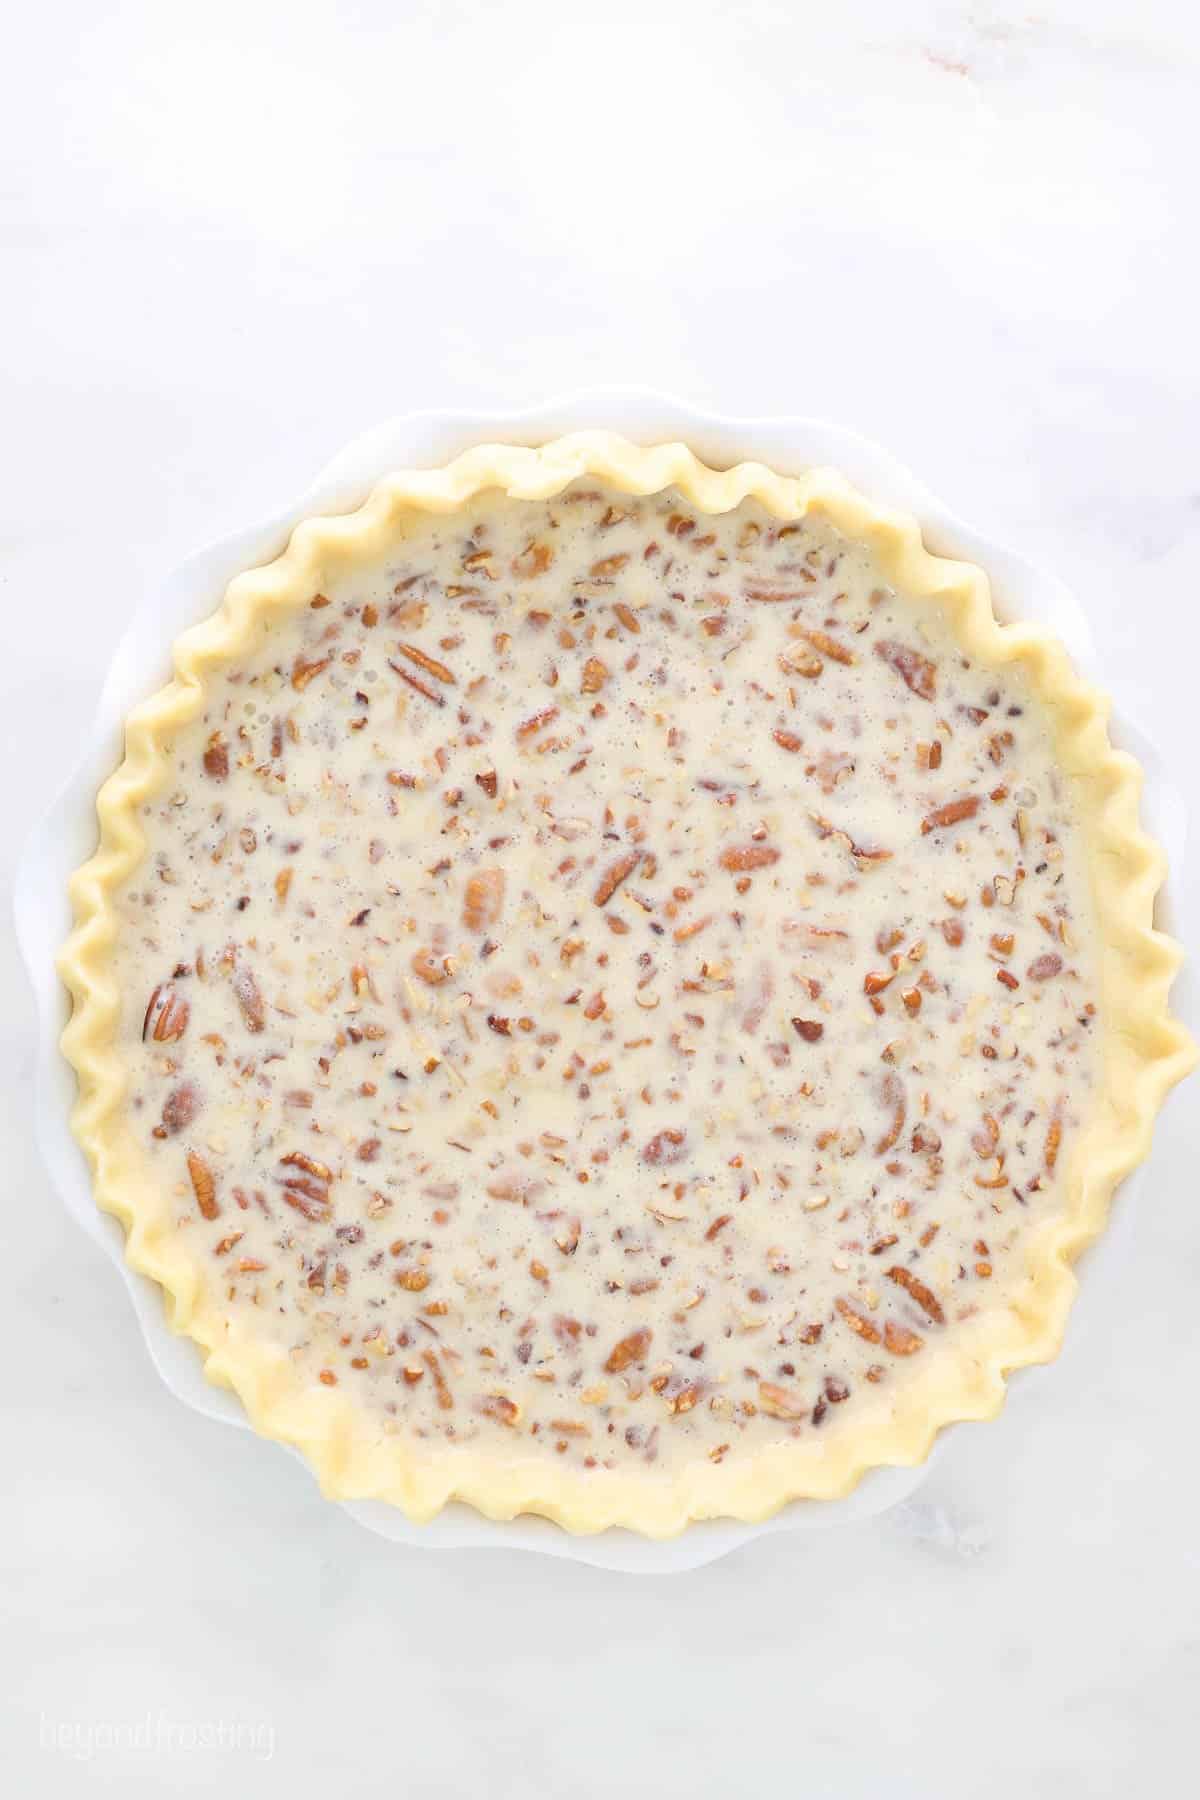 An unbaked pie crust filled with Kahlua pecan pie filling